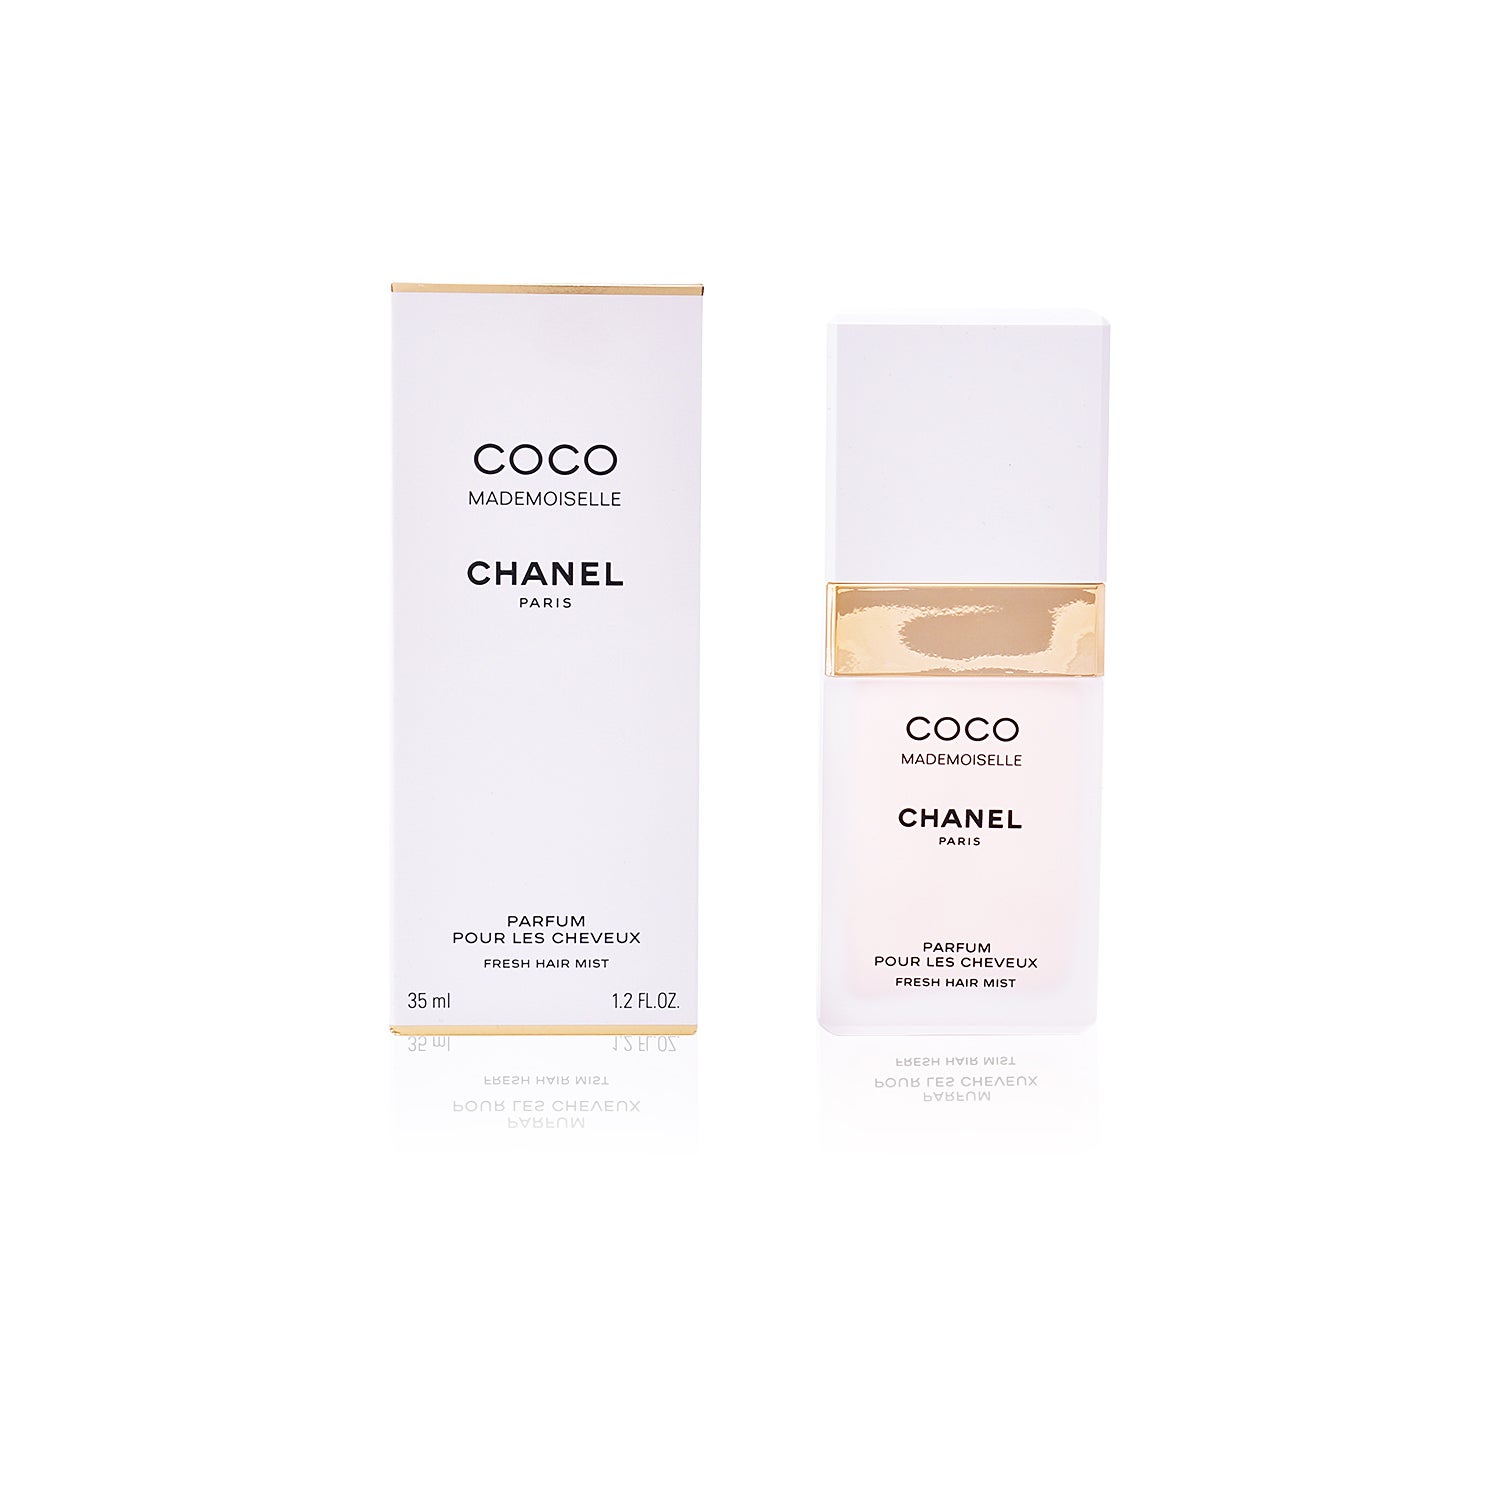 Afvige Armstrong tung Chanel Coco Mademoiselle Brume Cheveux Parfum 35ml | DocMorris France